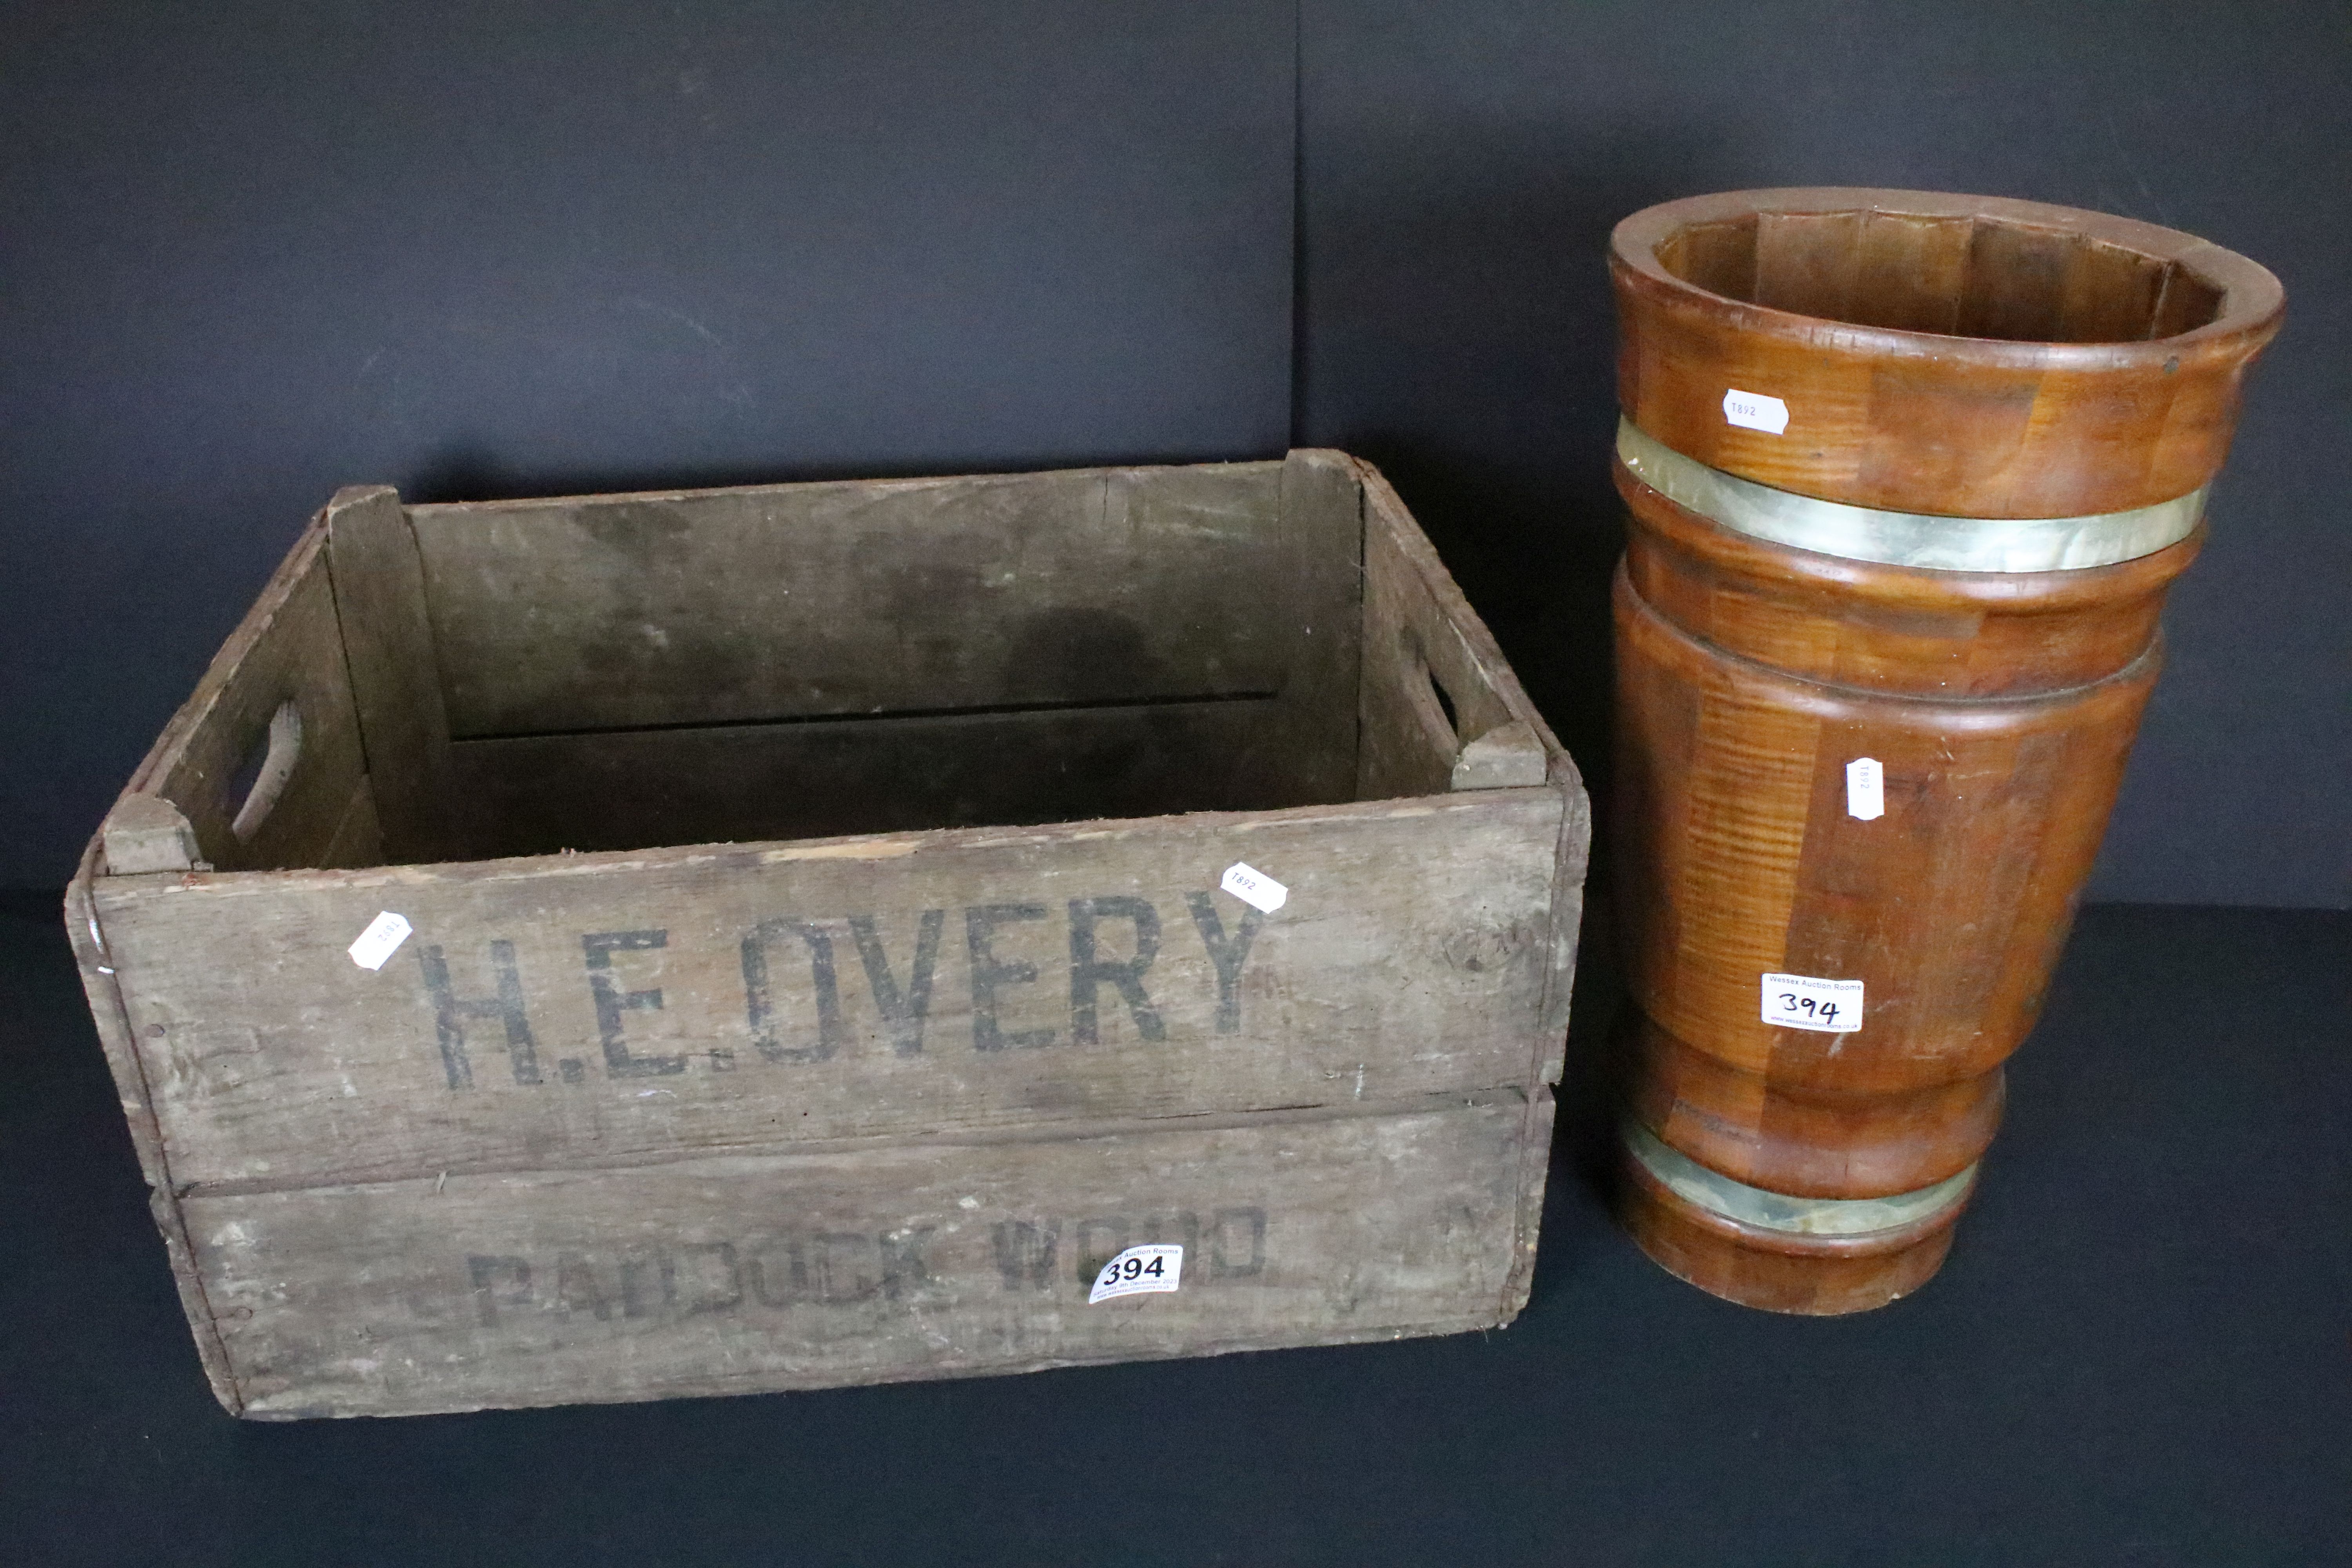 20th Century industrial advertising crate for H E Overy together with a brass bound wooden stick /